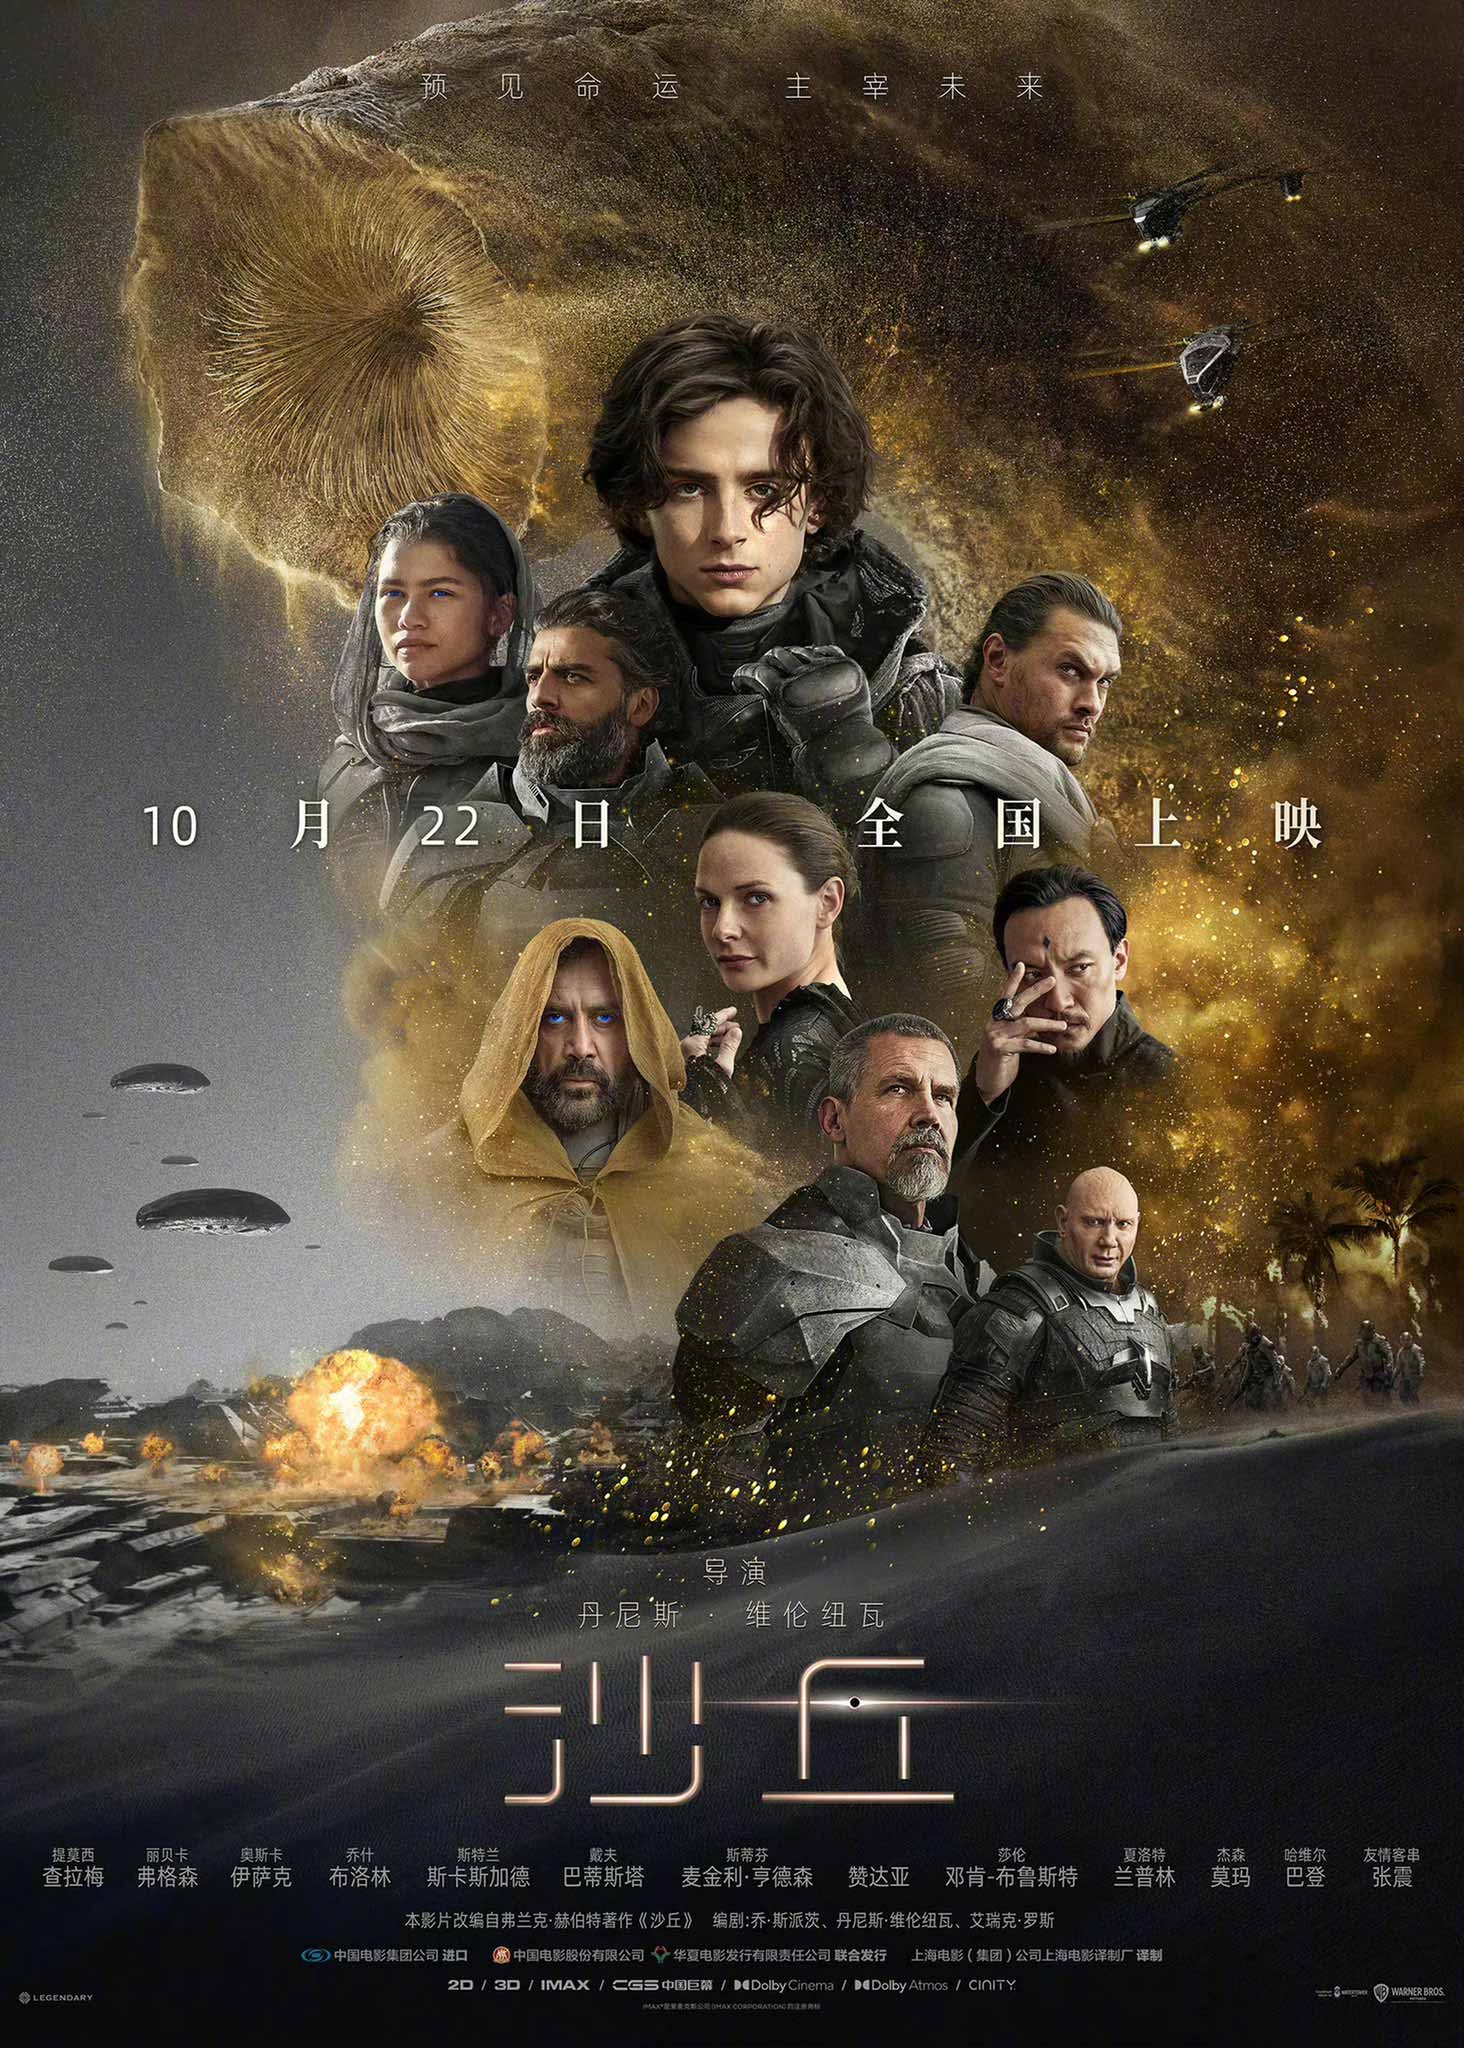 Final Chinese poster for Dune: Part One. The movie premiered in mainland China on October 22, 2021.